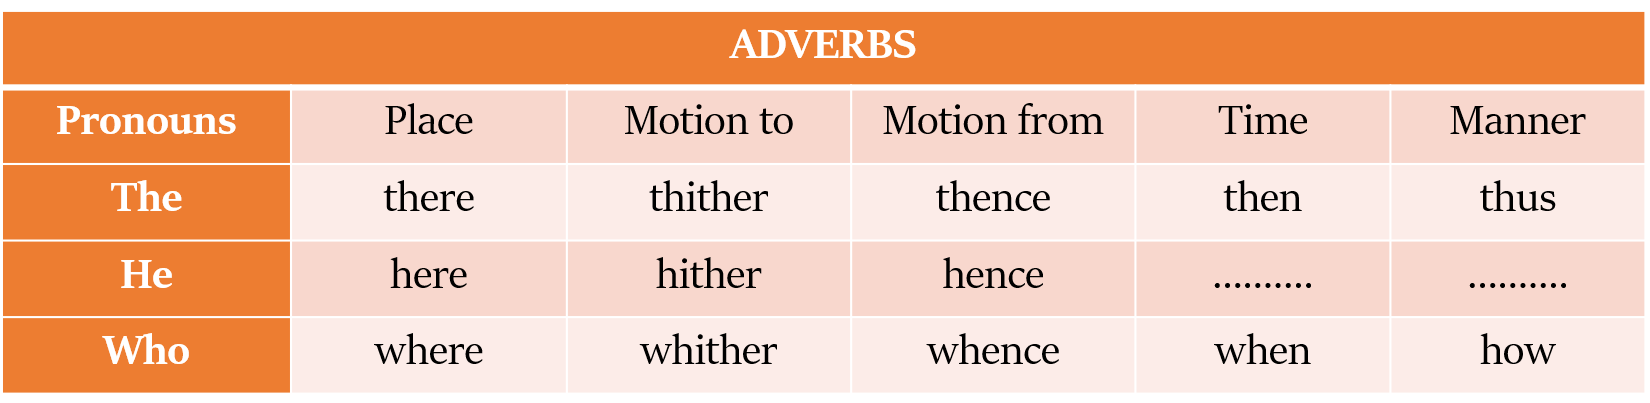 formation of adverbs